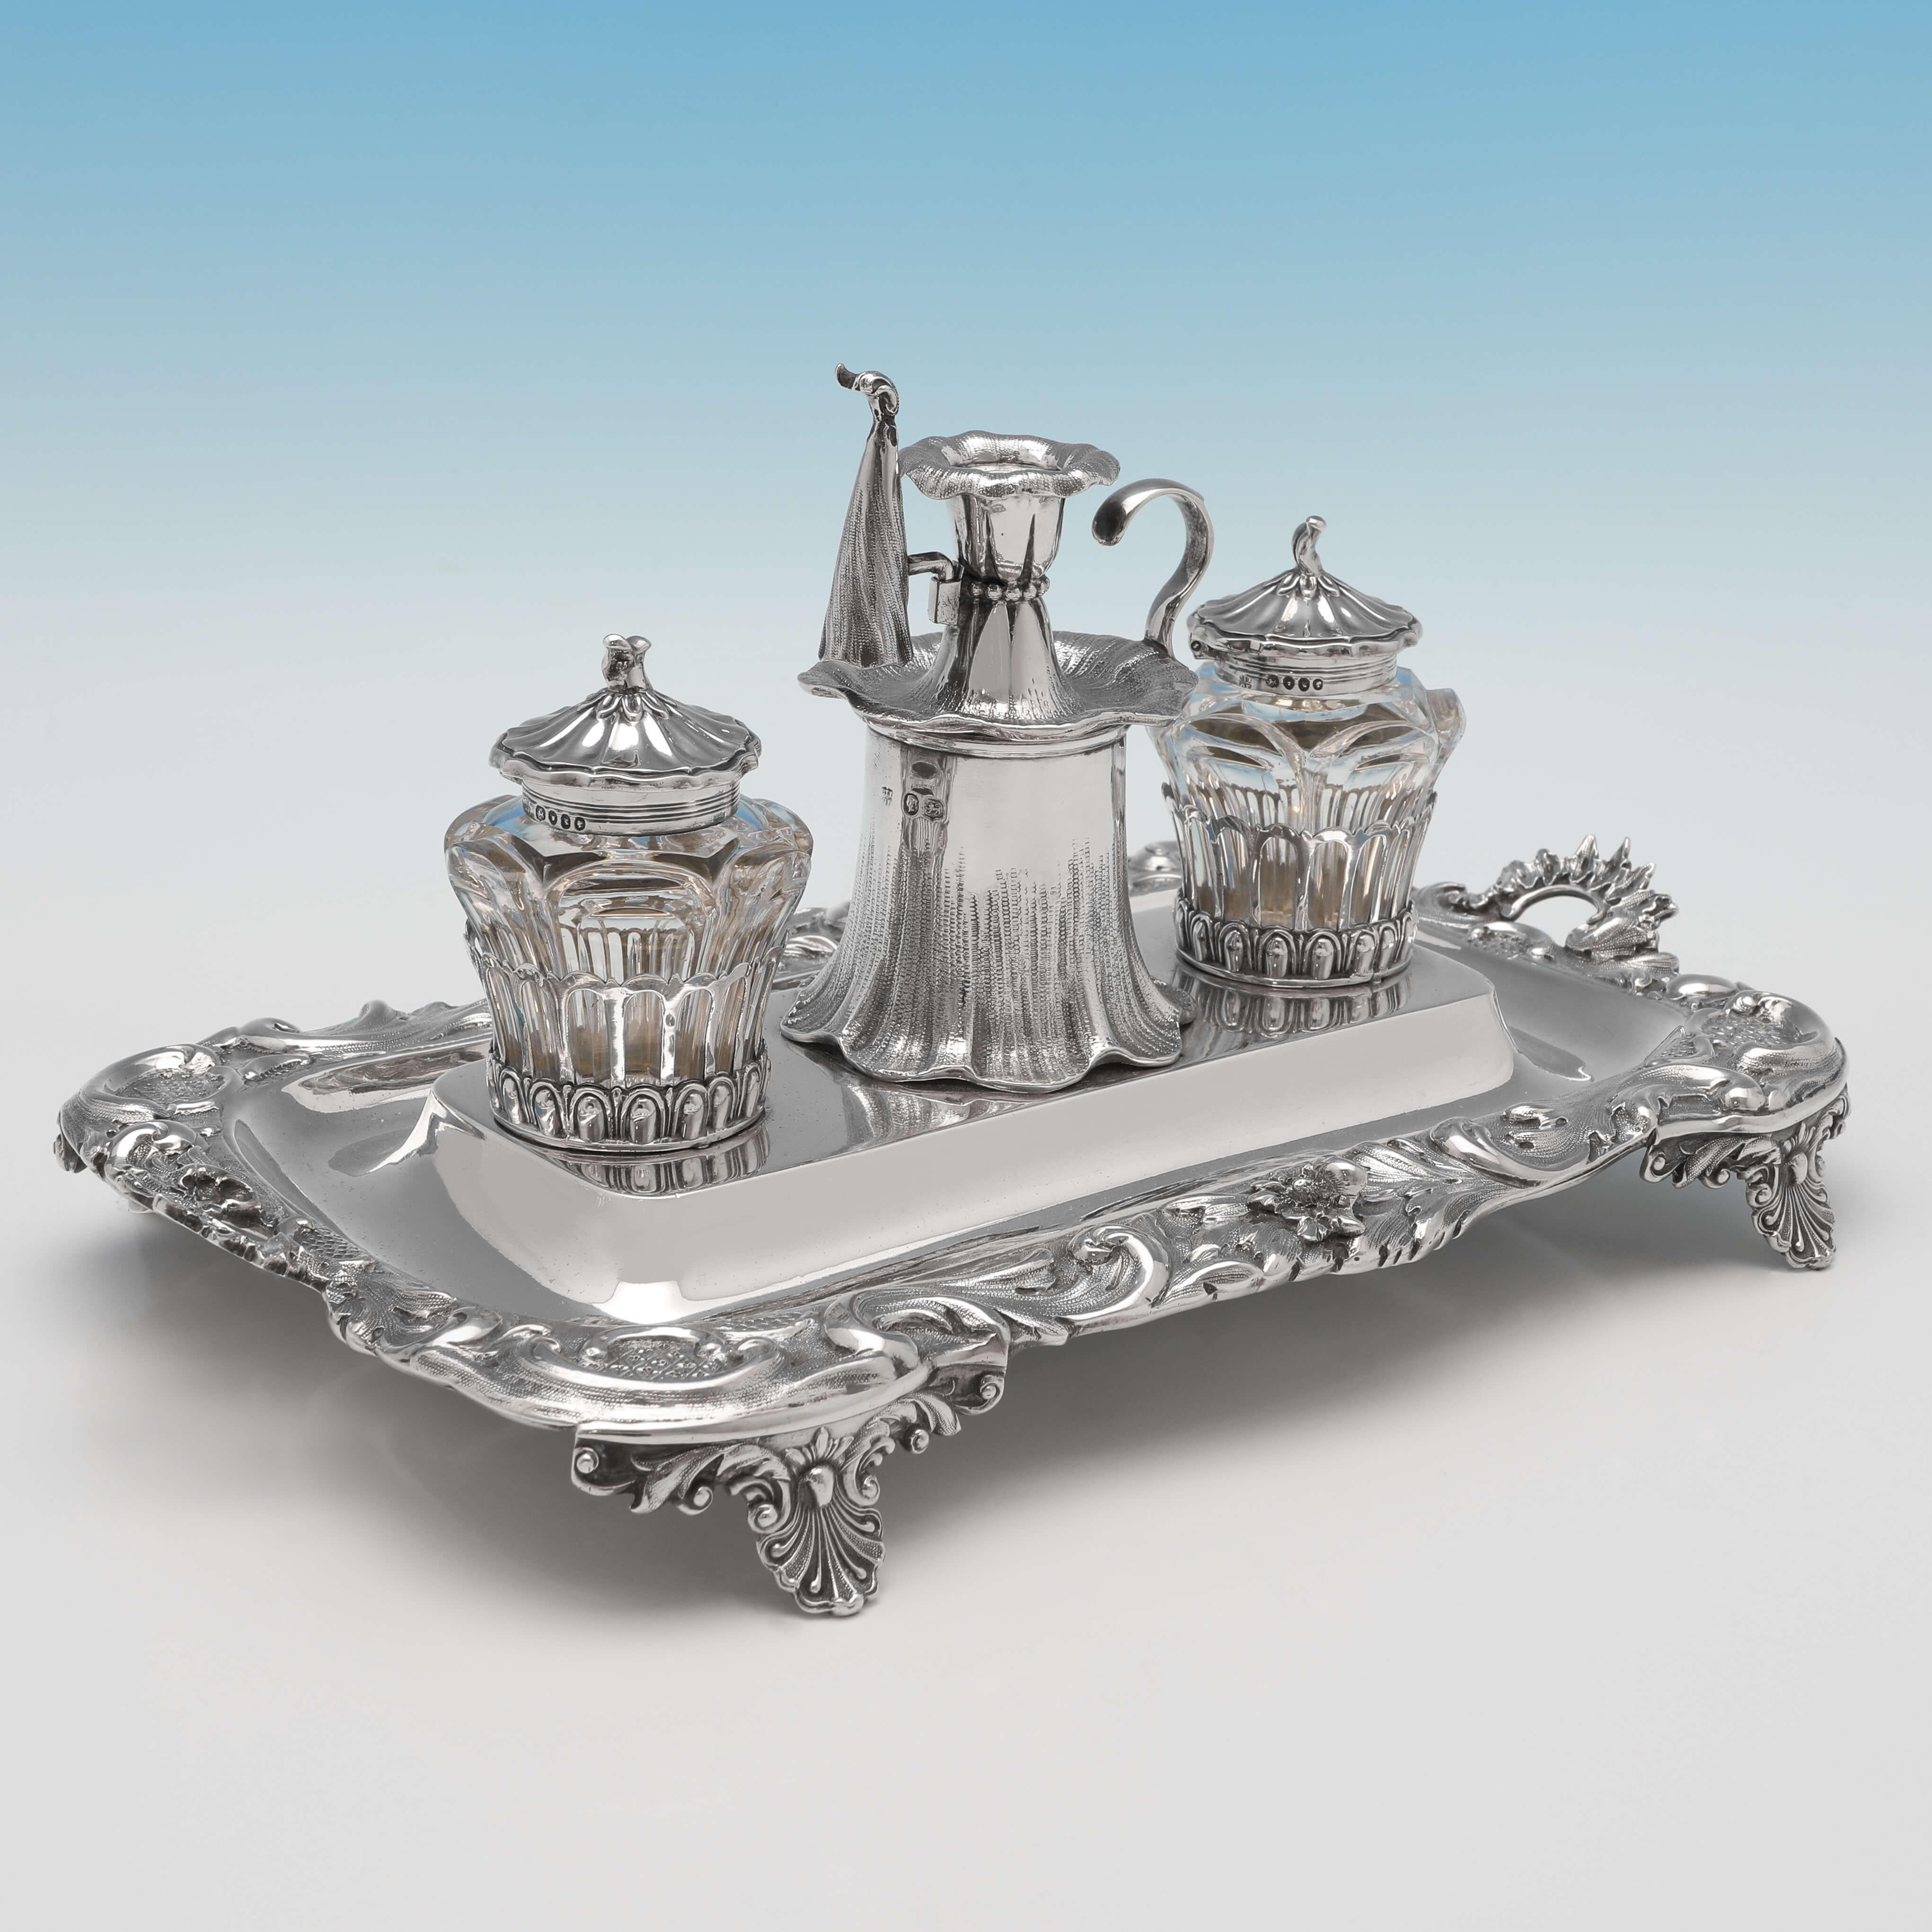 Hallmarked in London in 1846 by Charles & George Fox, this charming, Victorian, Antique Sterling Silver ink stand, features an ornate scroll border, decorative feet, and naturalistic design ink pots and taper-stick. The ink stand measures 5.5